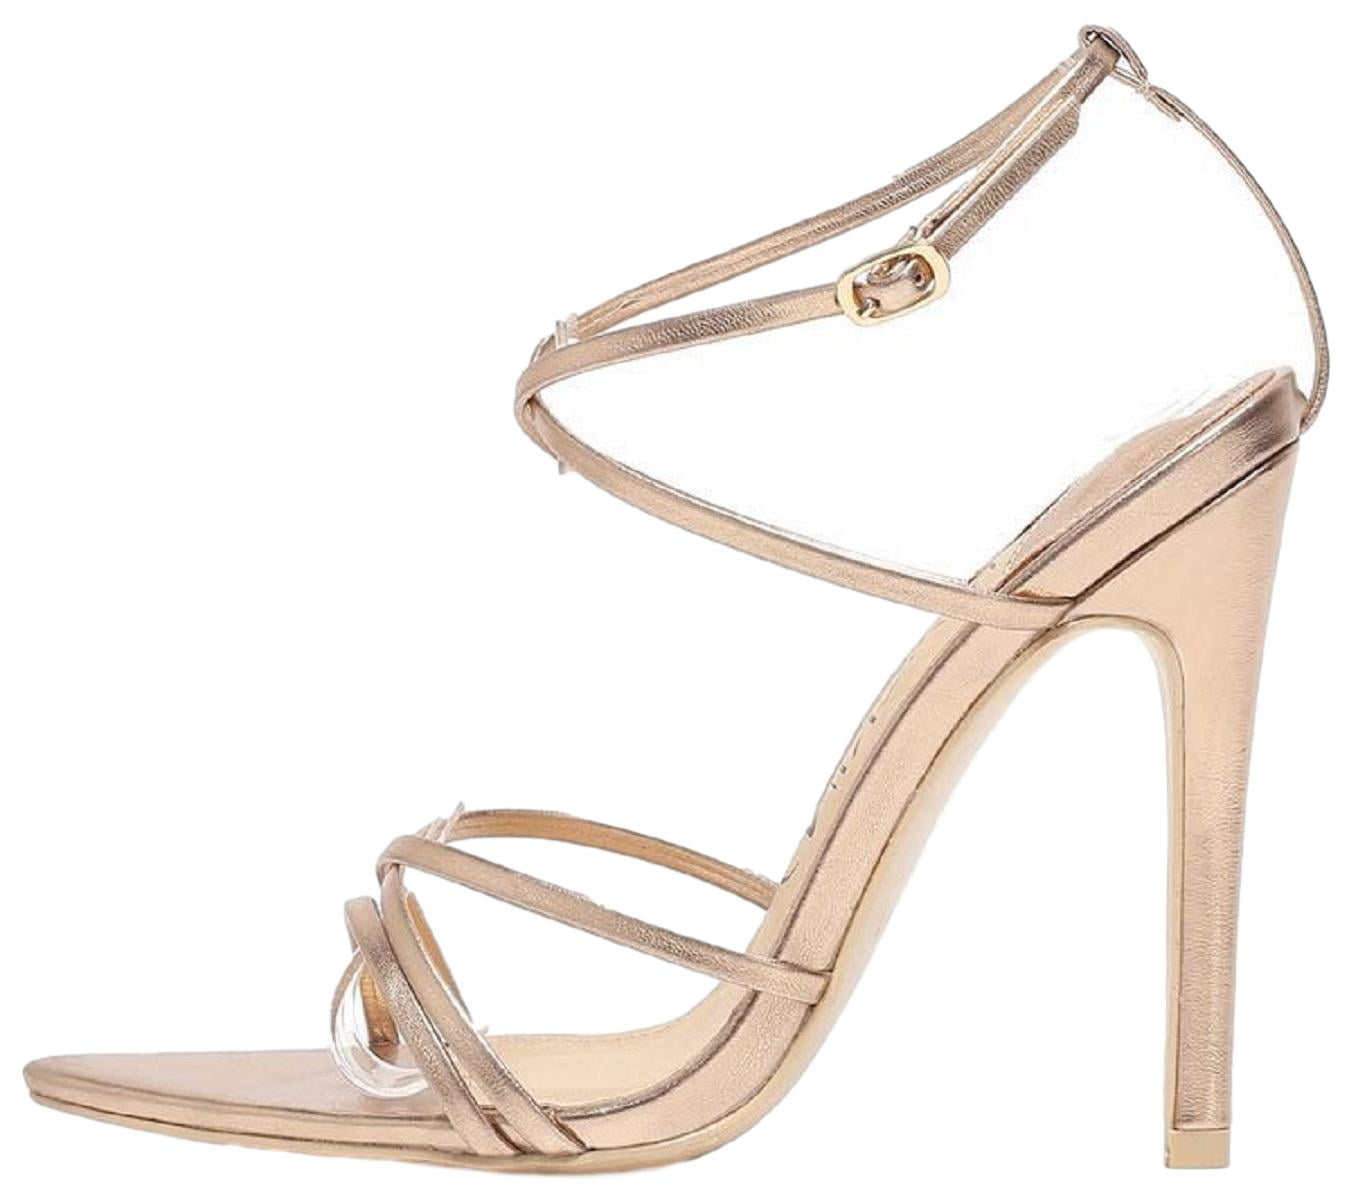 gold pointed strappy heels